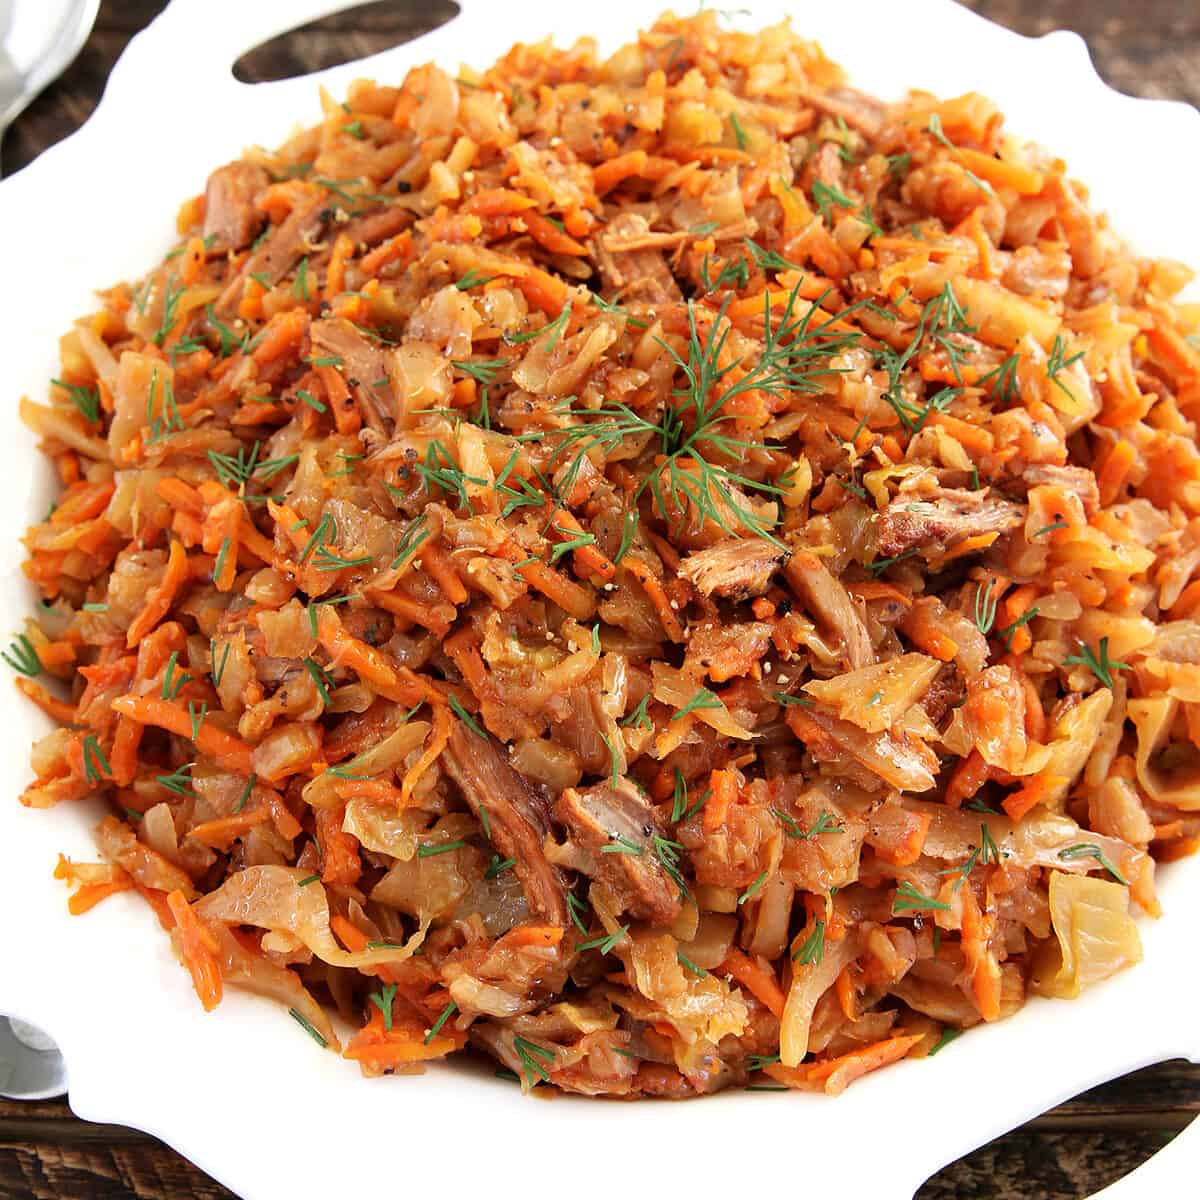 This Braised Cabbage with Beef is a very easy recipe to make but tastes so scrumptious and satisfying. It was a popular dish in Ukraine, as I was growing up. We had it pretty often during cabbage season and enjoyed it.